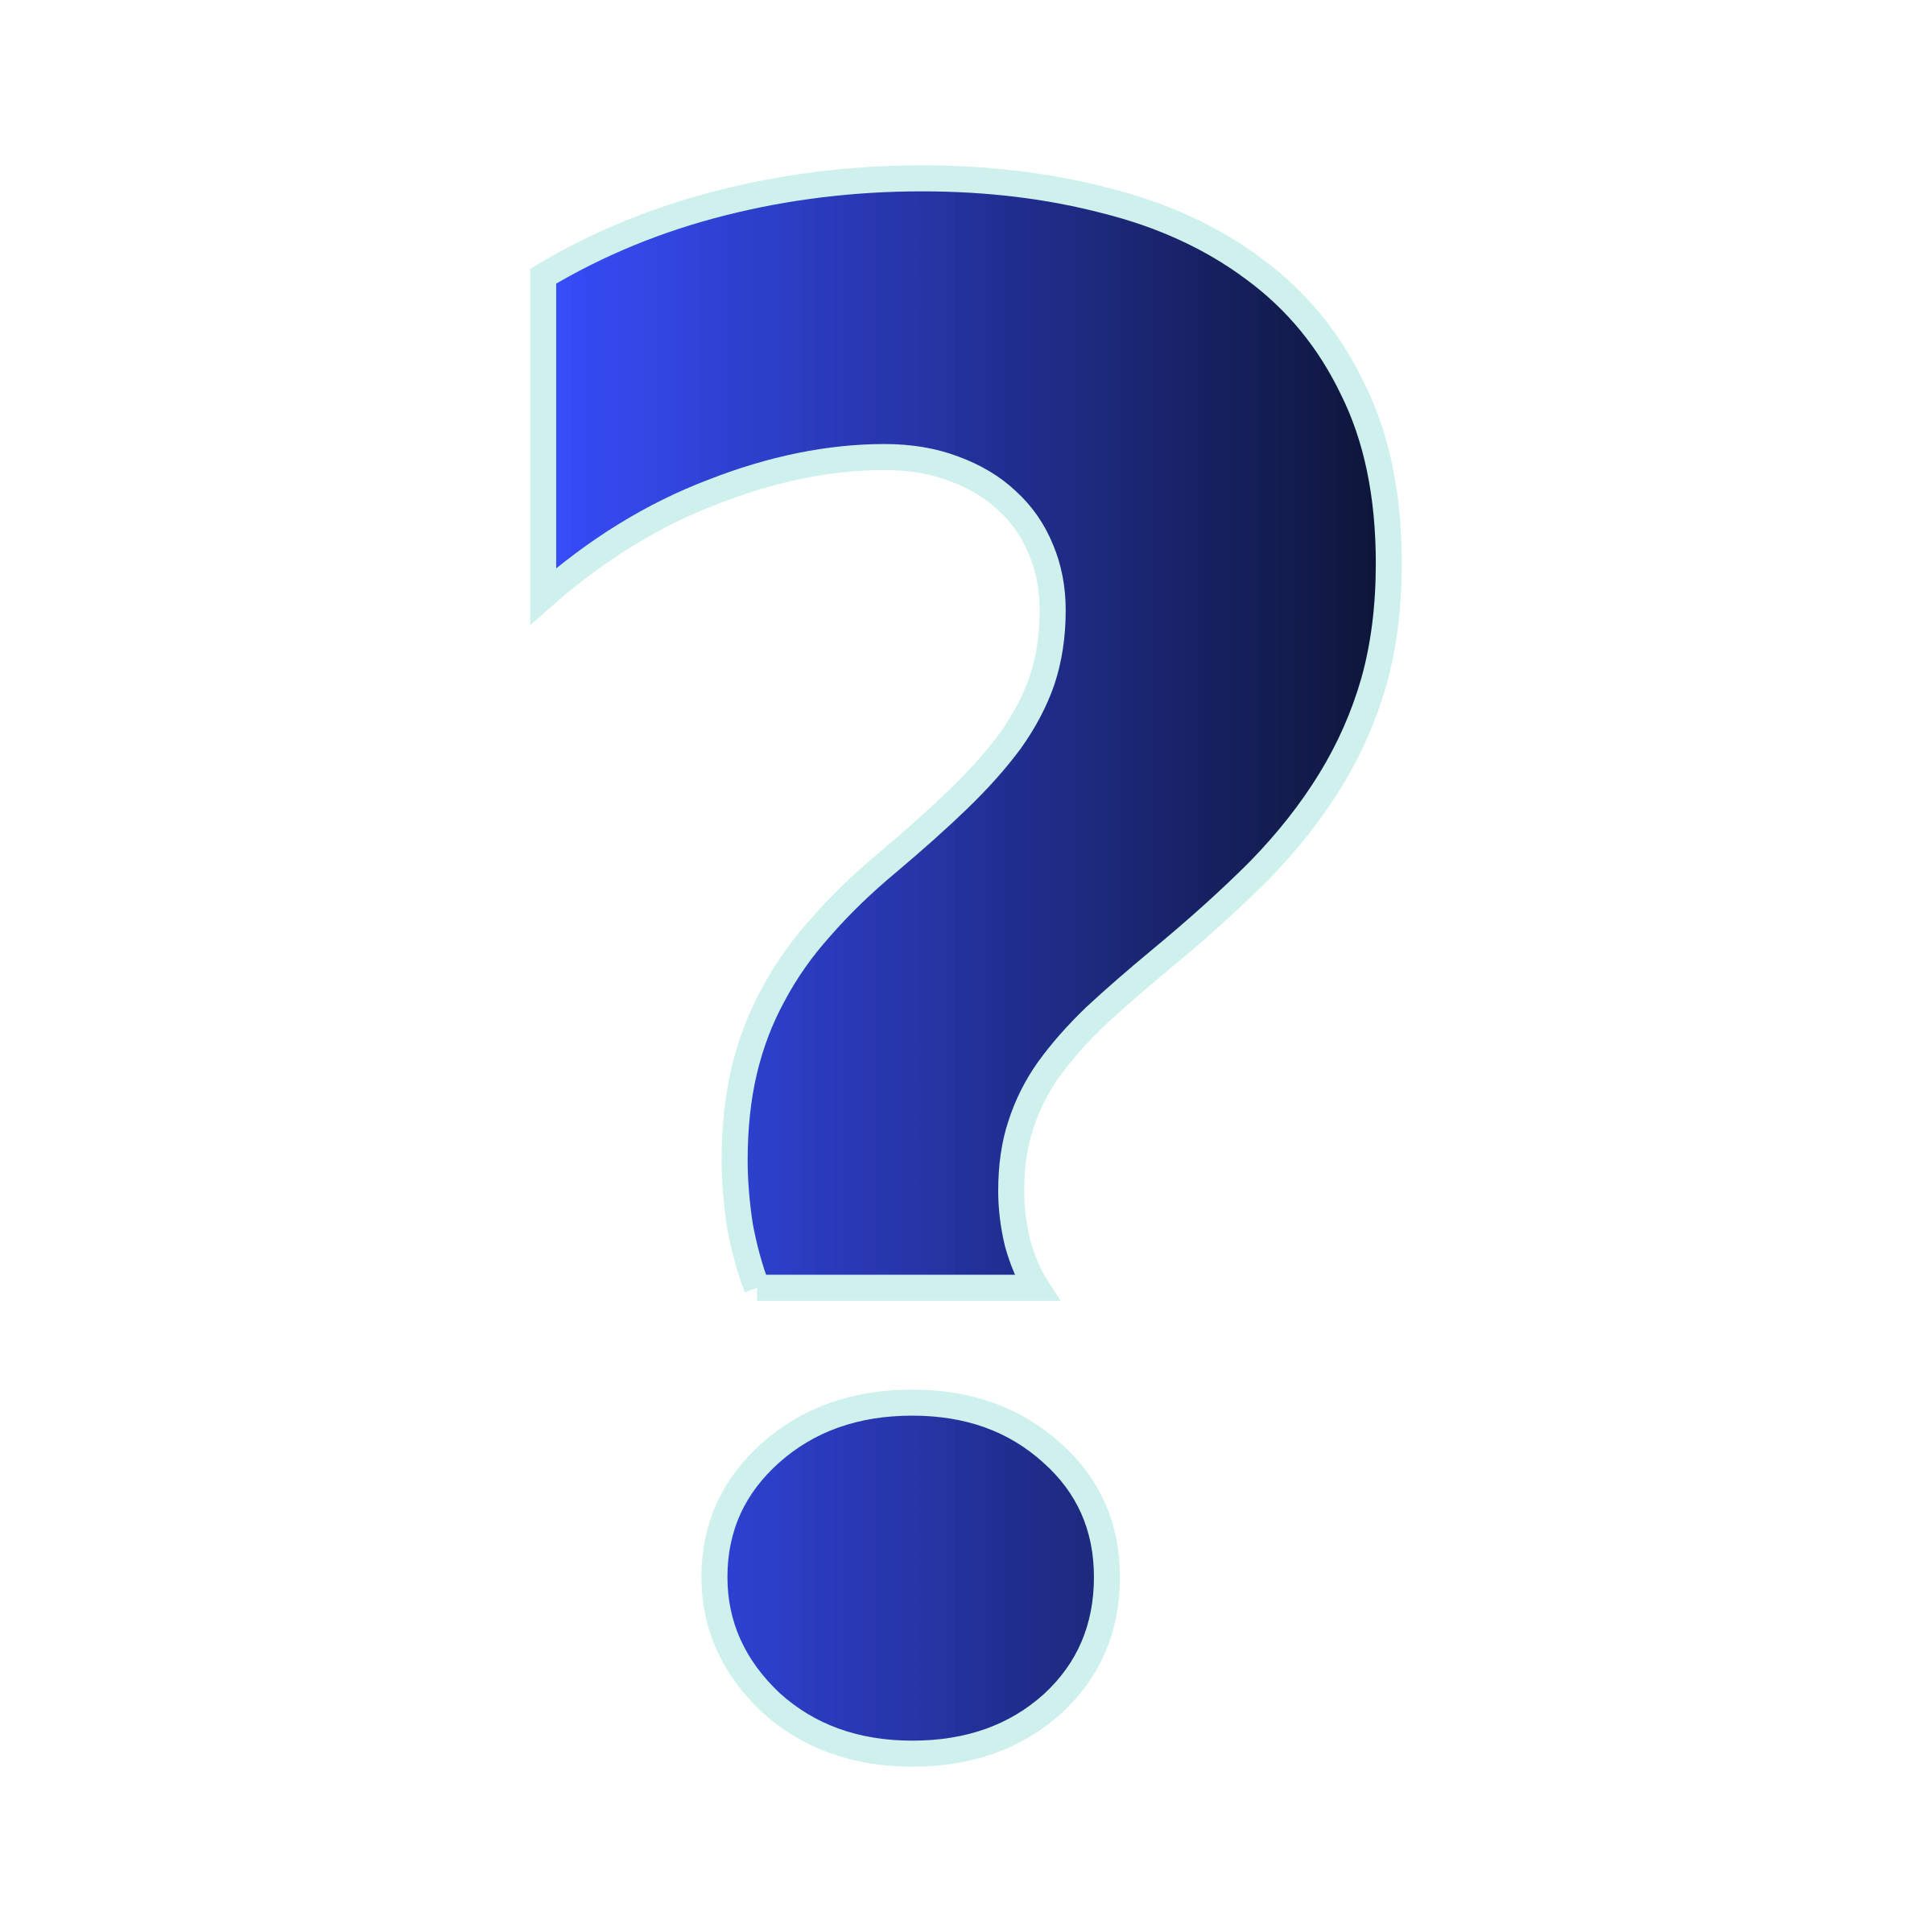 clipart pictures of question marks - photo #41